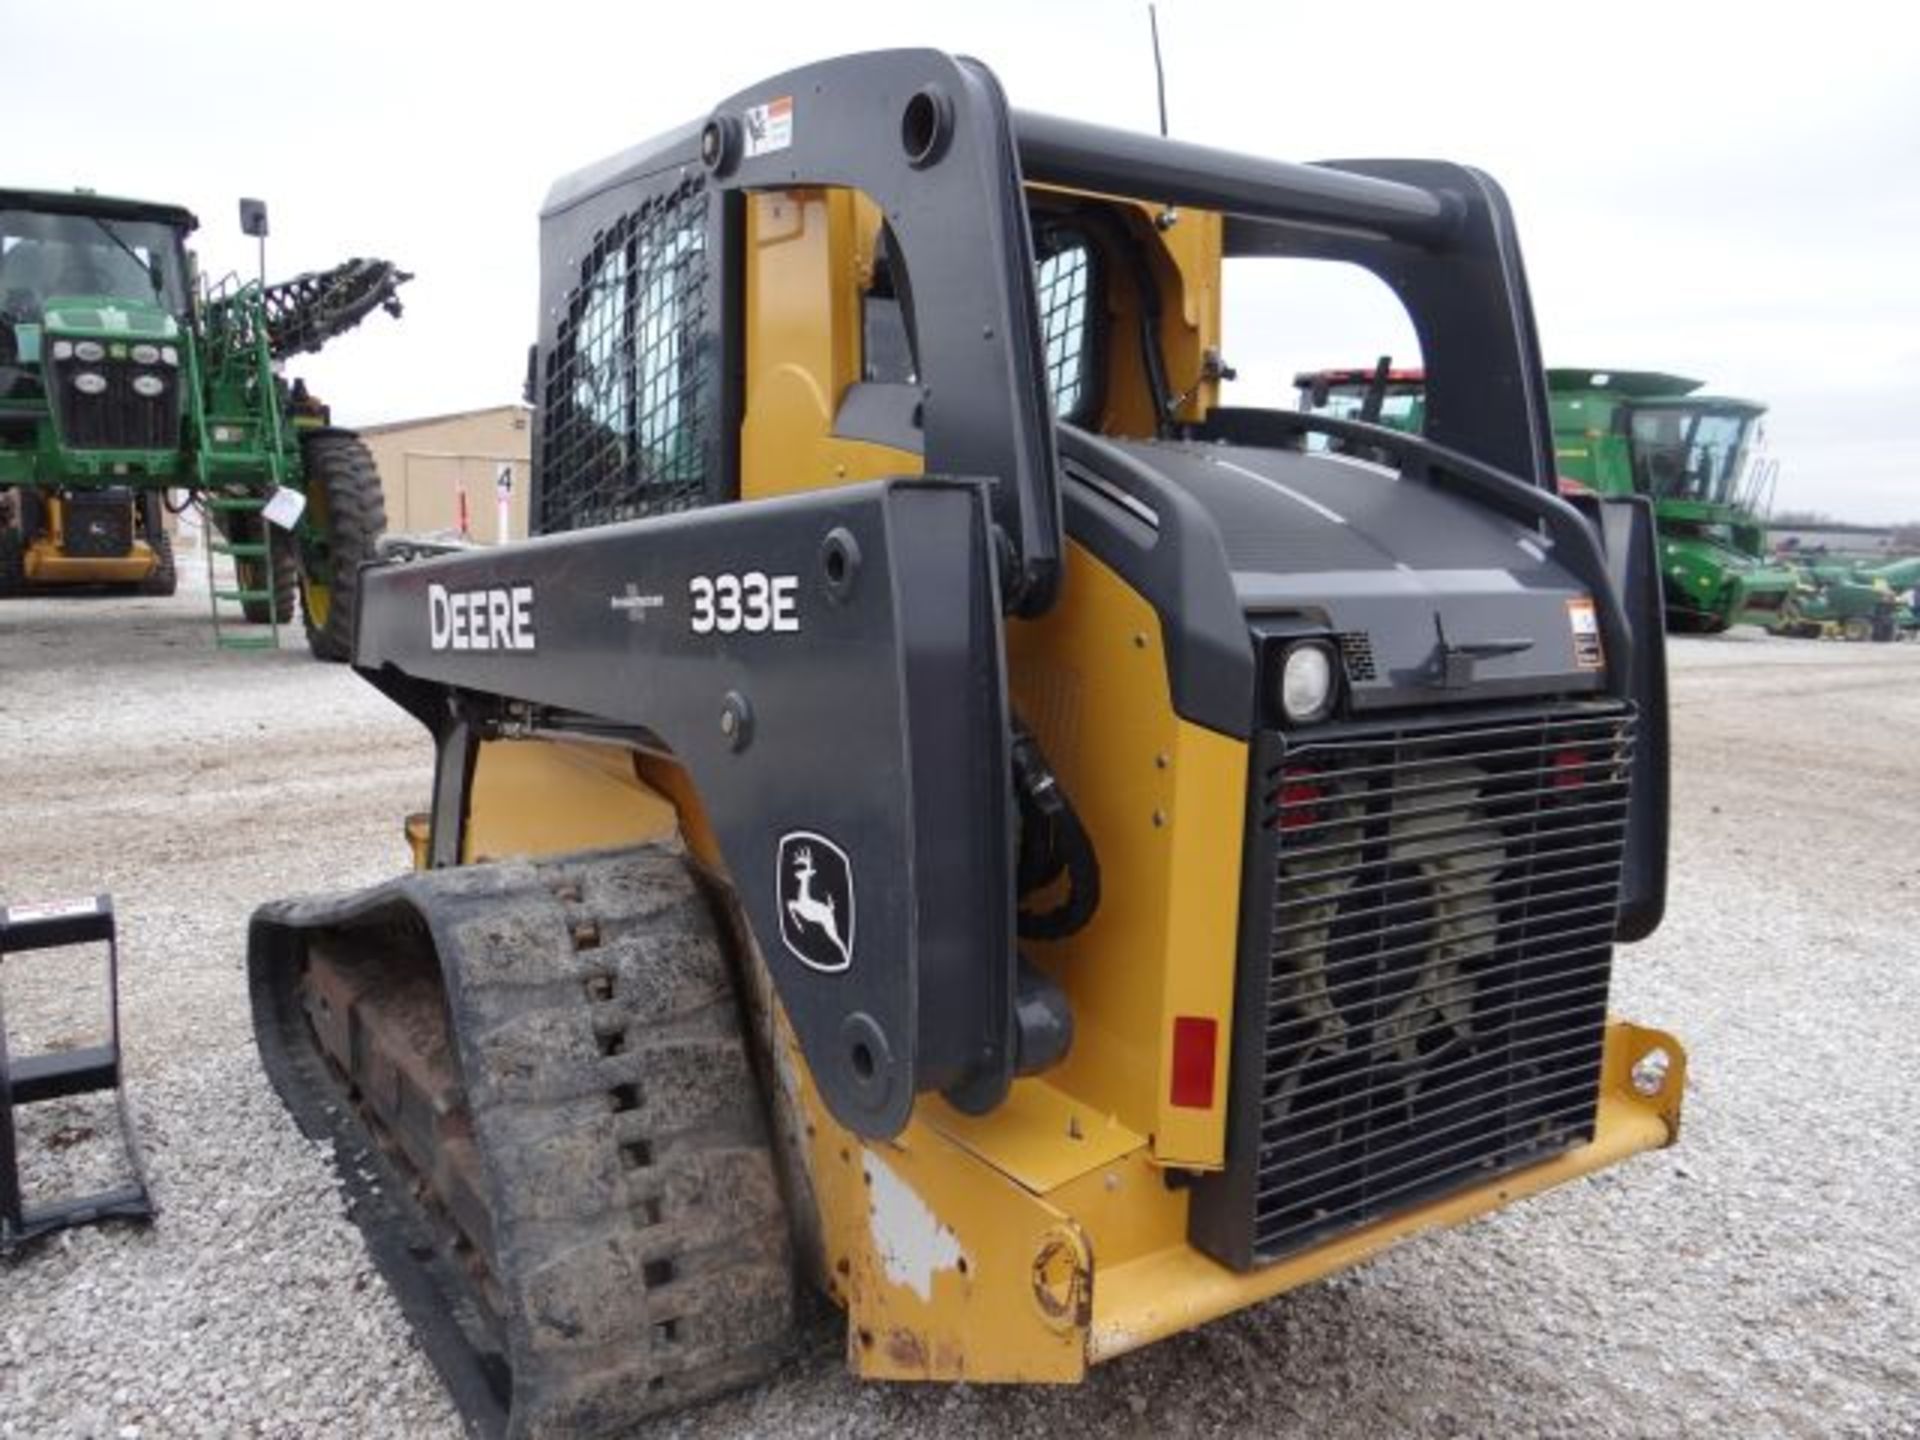 JD 333E Skid Steer, 2015 #64033, CTL, Cab w/ Ac and Heat, Switchable EH Foot-H-ISO Pattern - Image 3 of 6